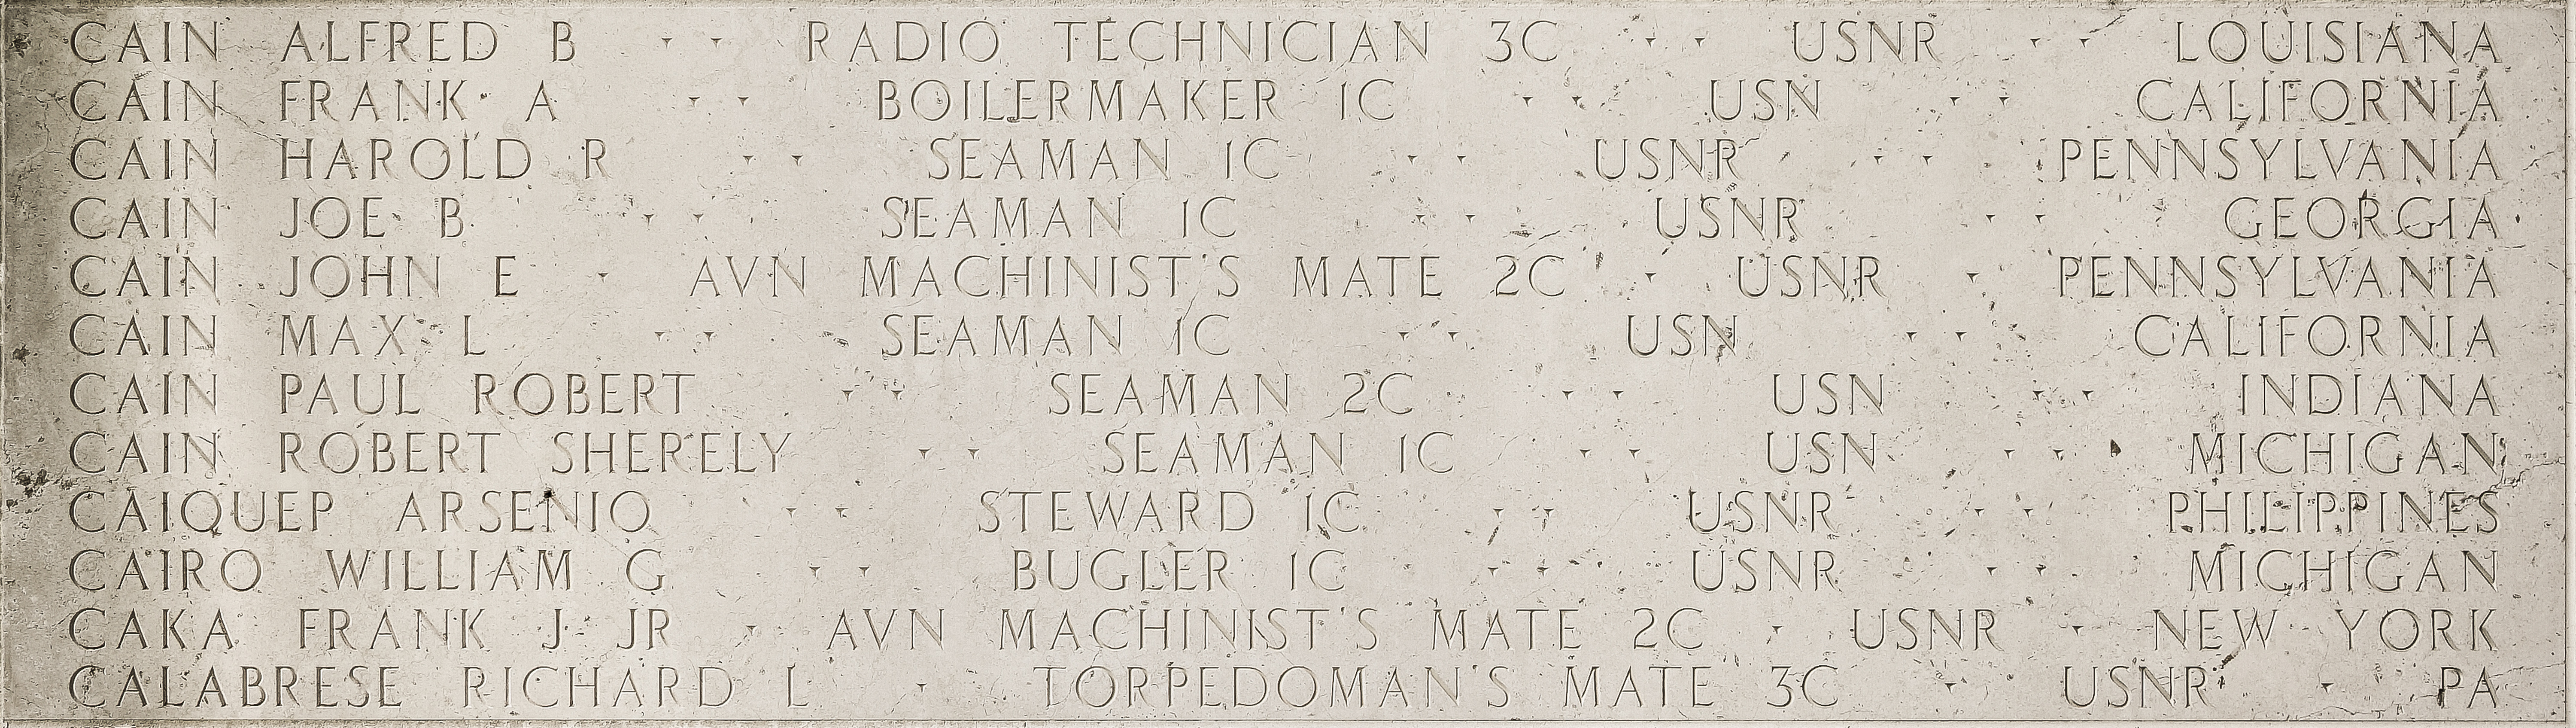 Frank A. Cain, Boilermaker First Class